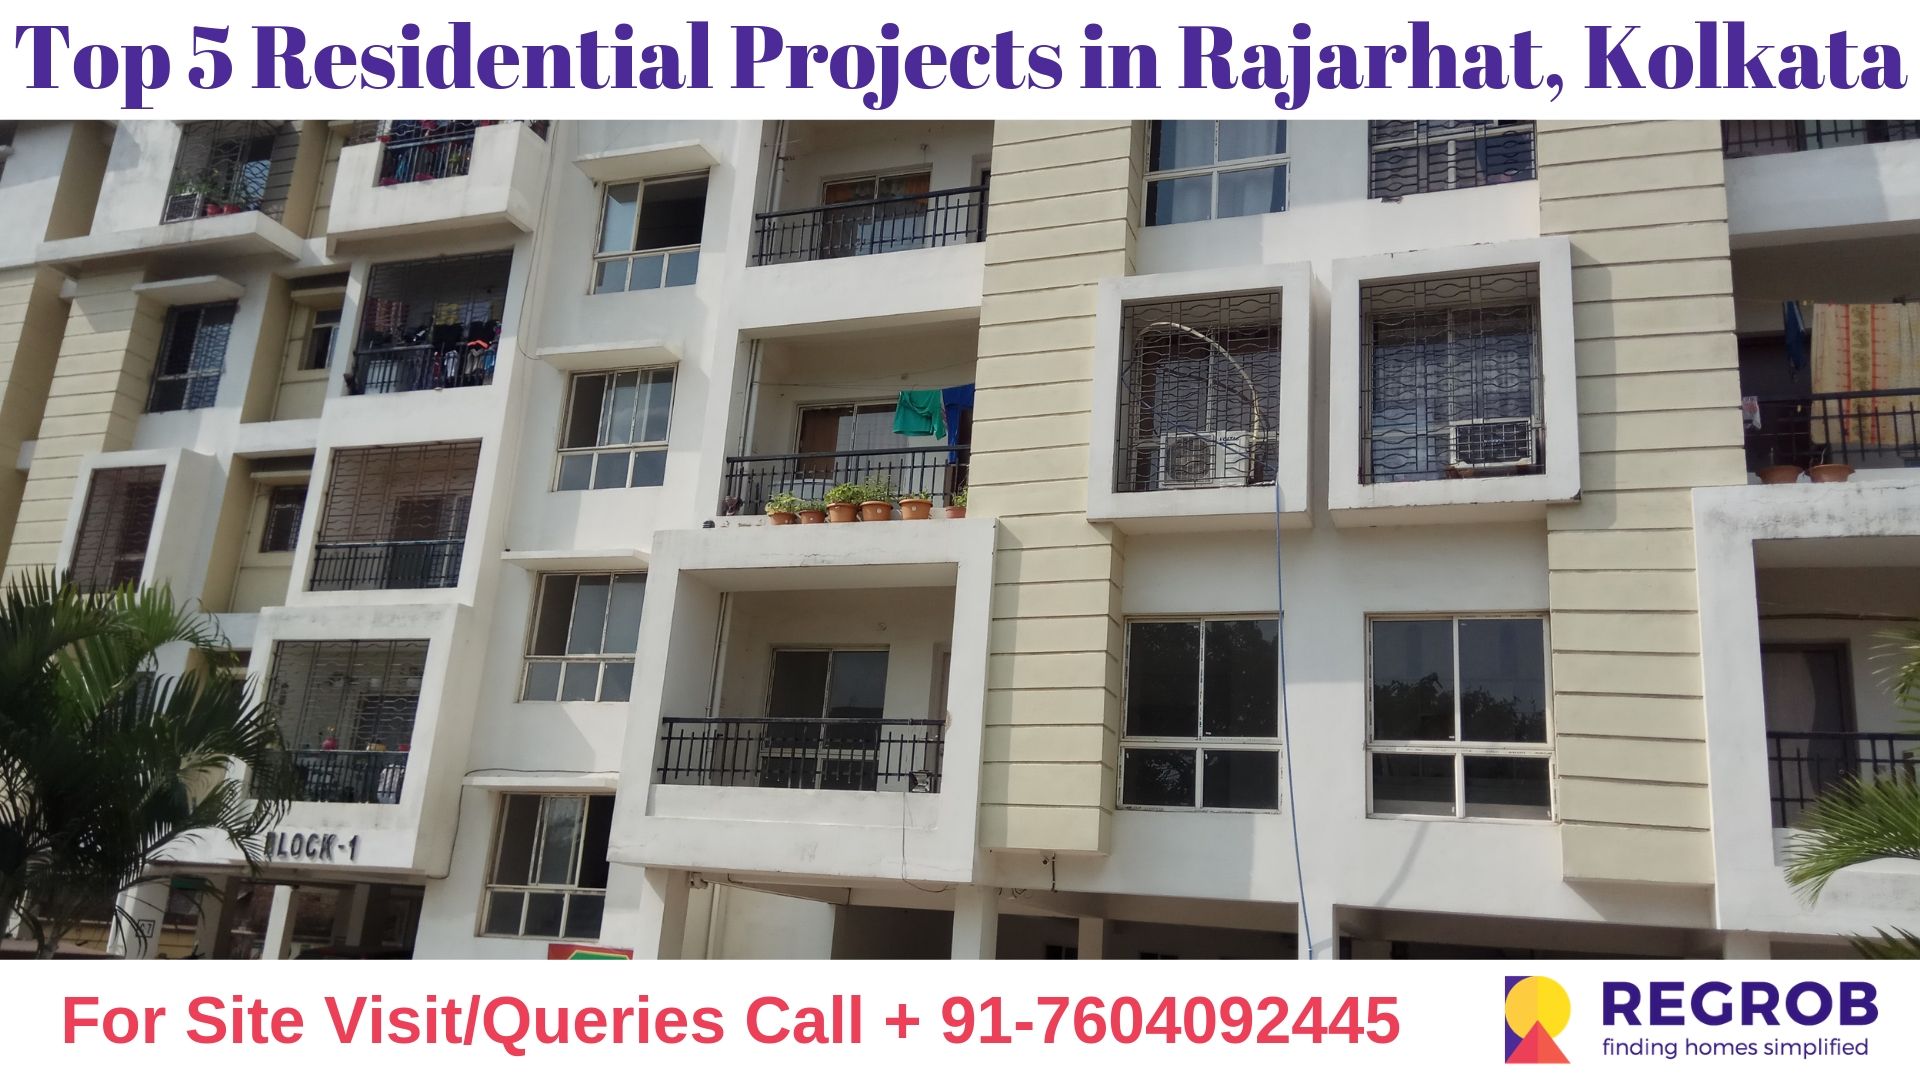 Top 5 Affordable Residential Projects in Rajarhat, Kolkata